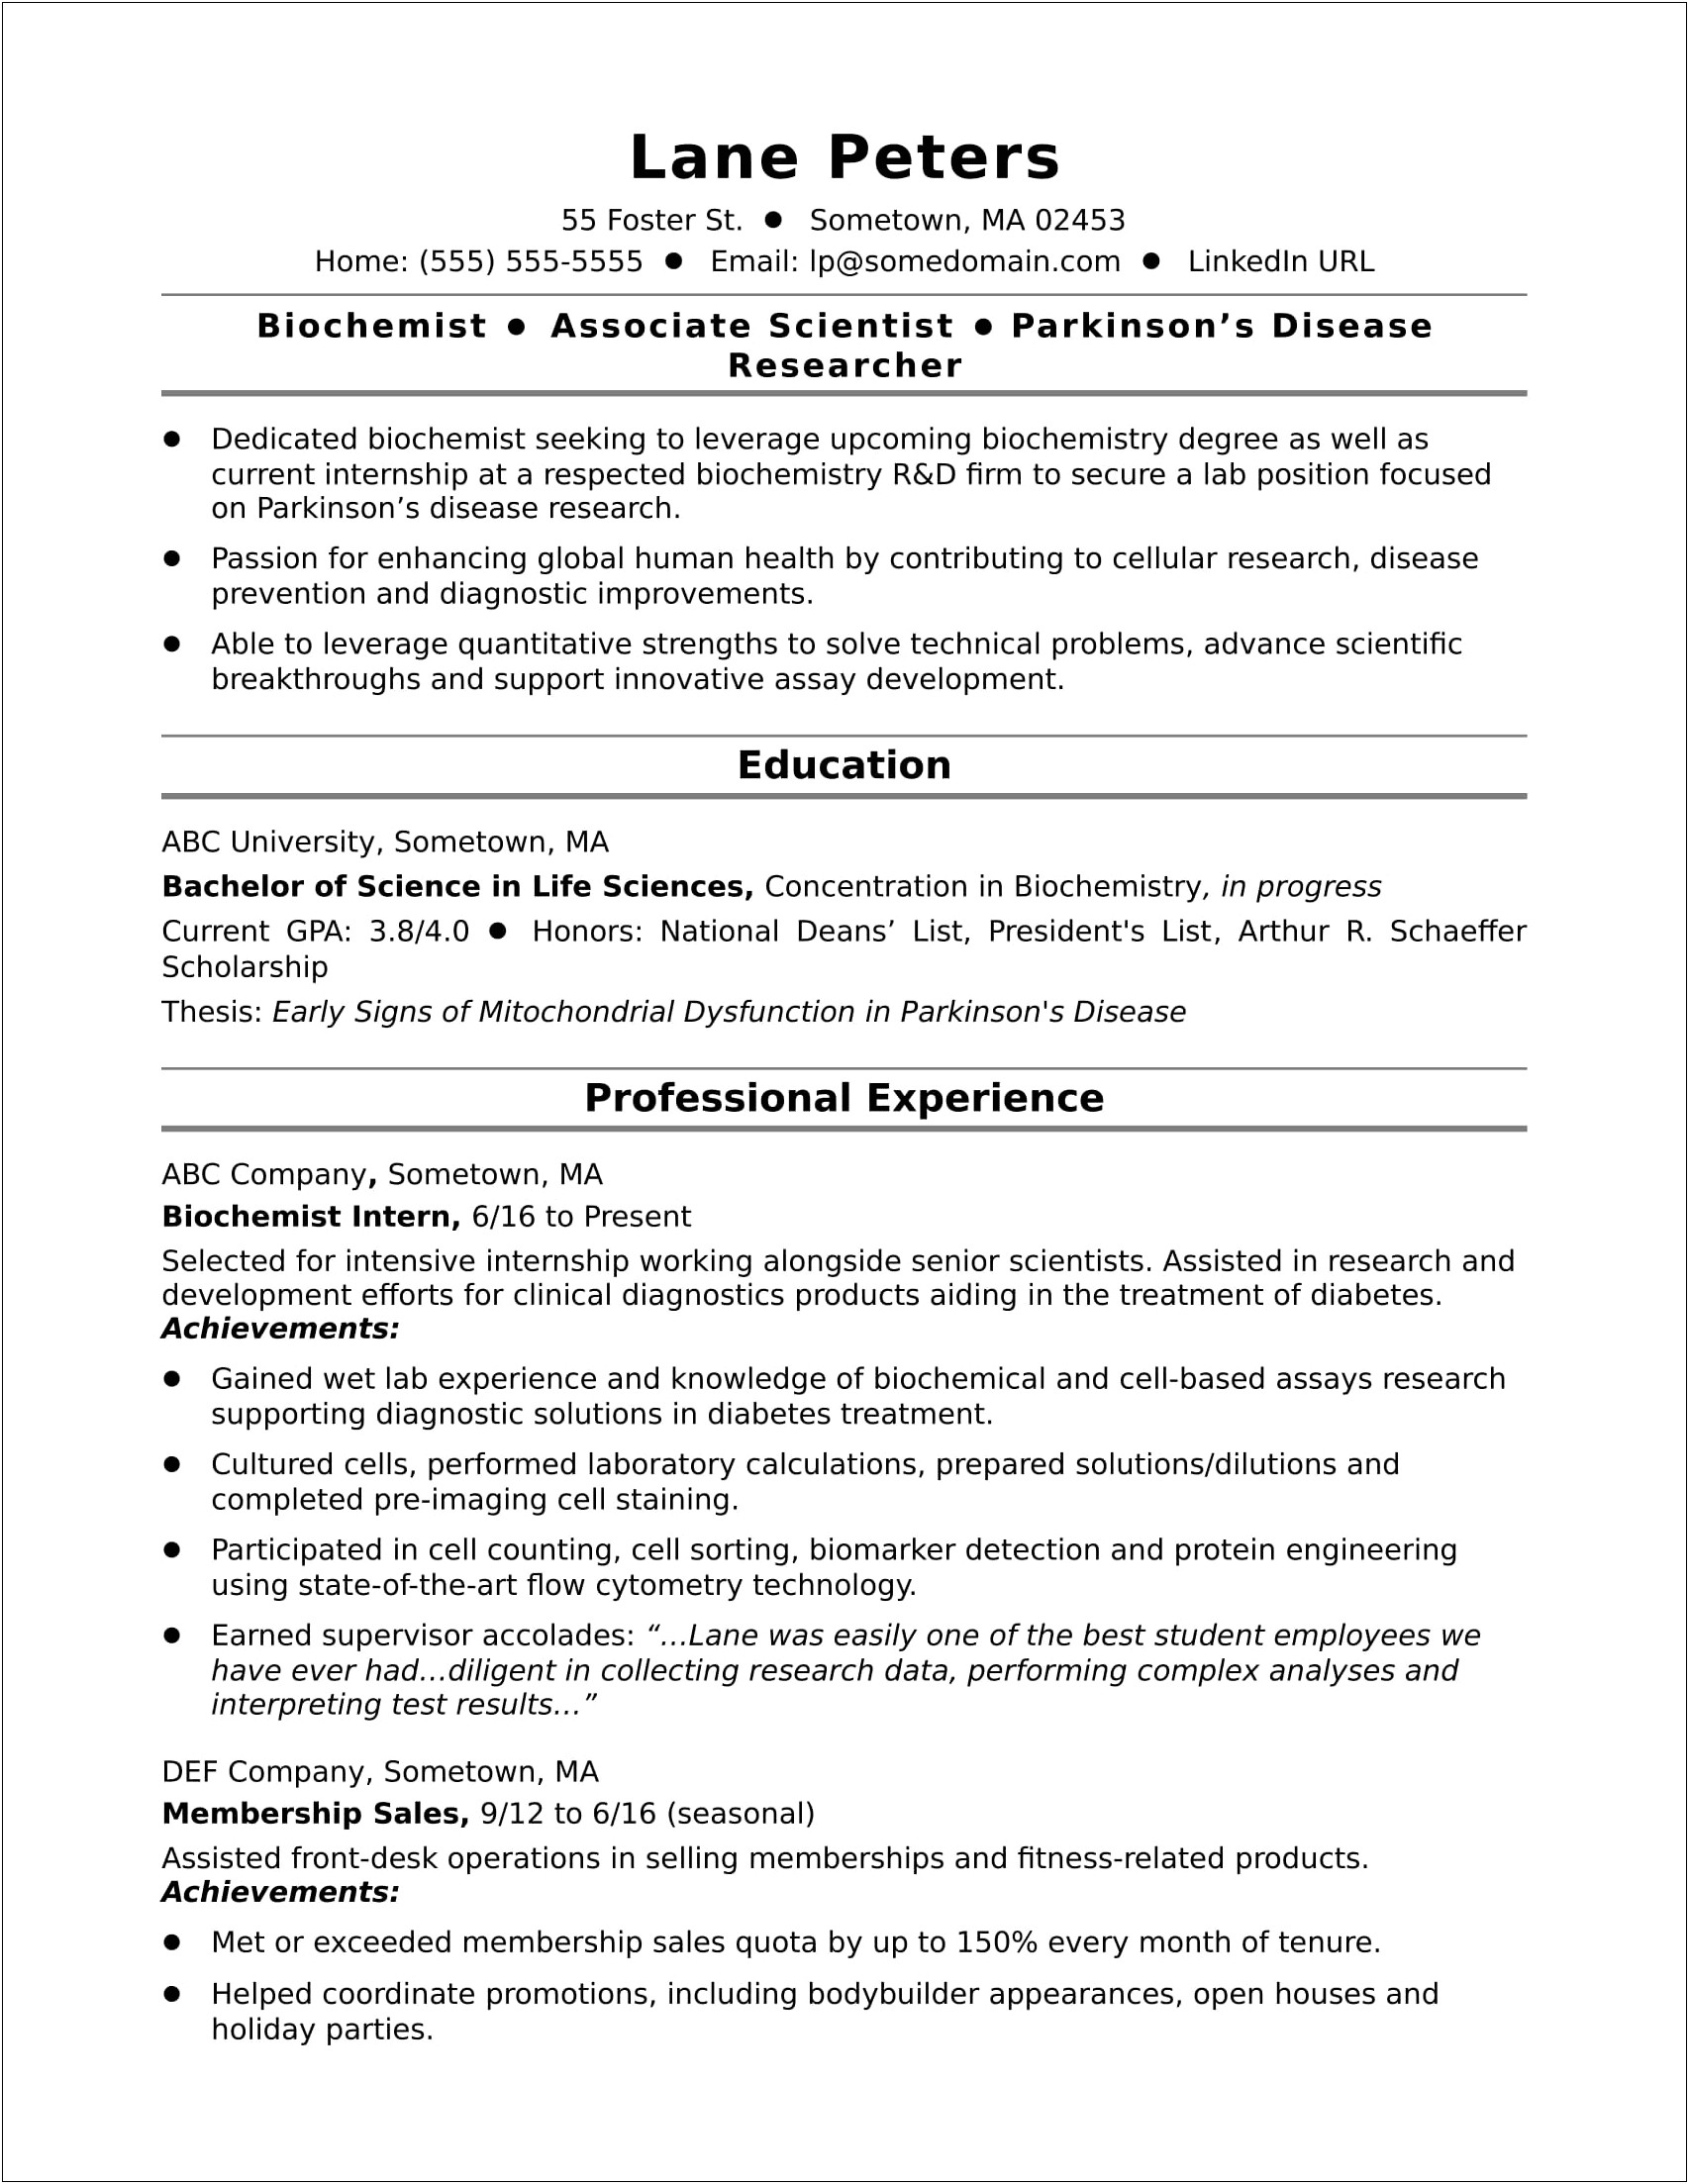 Masters Of Science In Management Uf On Resume